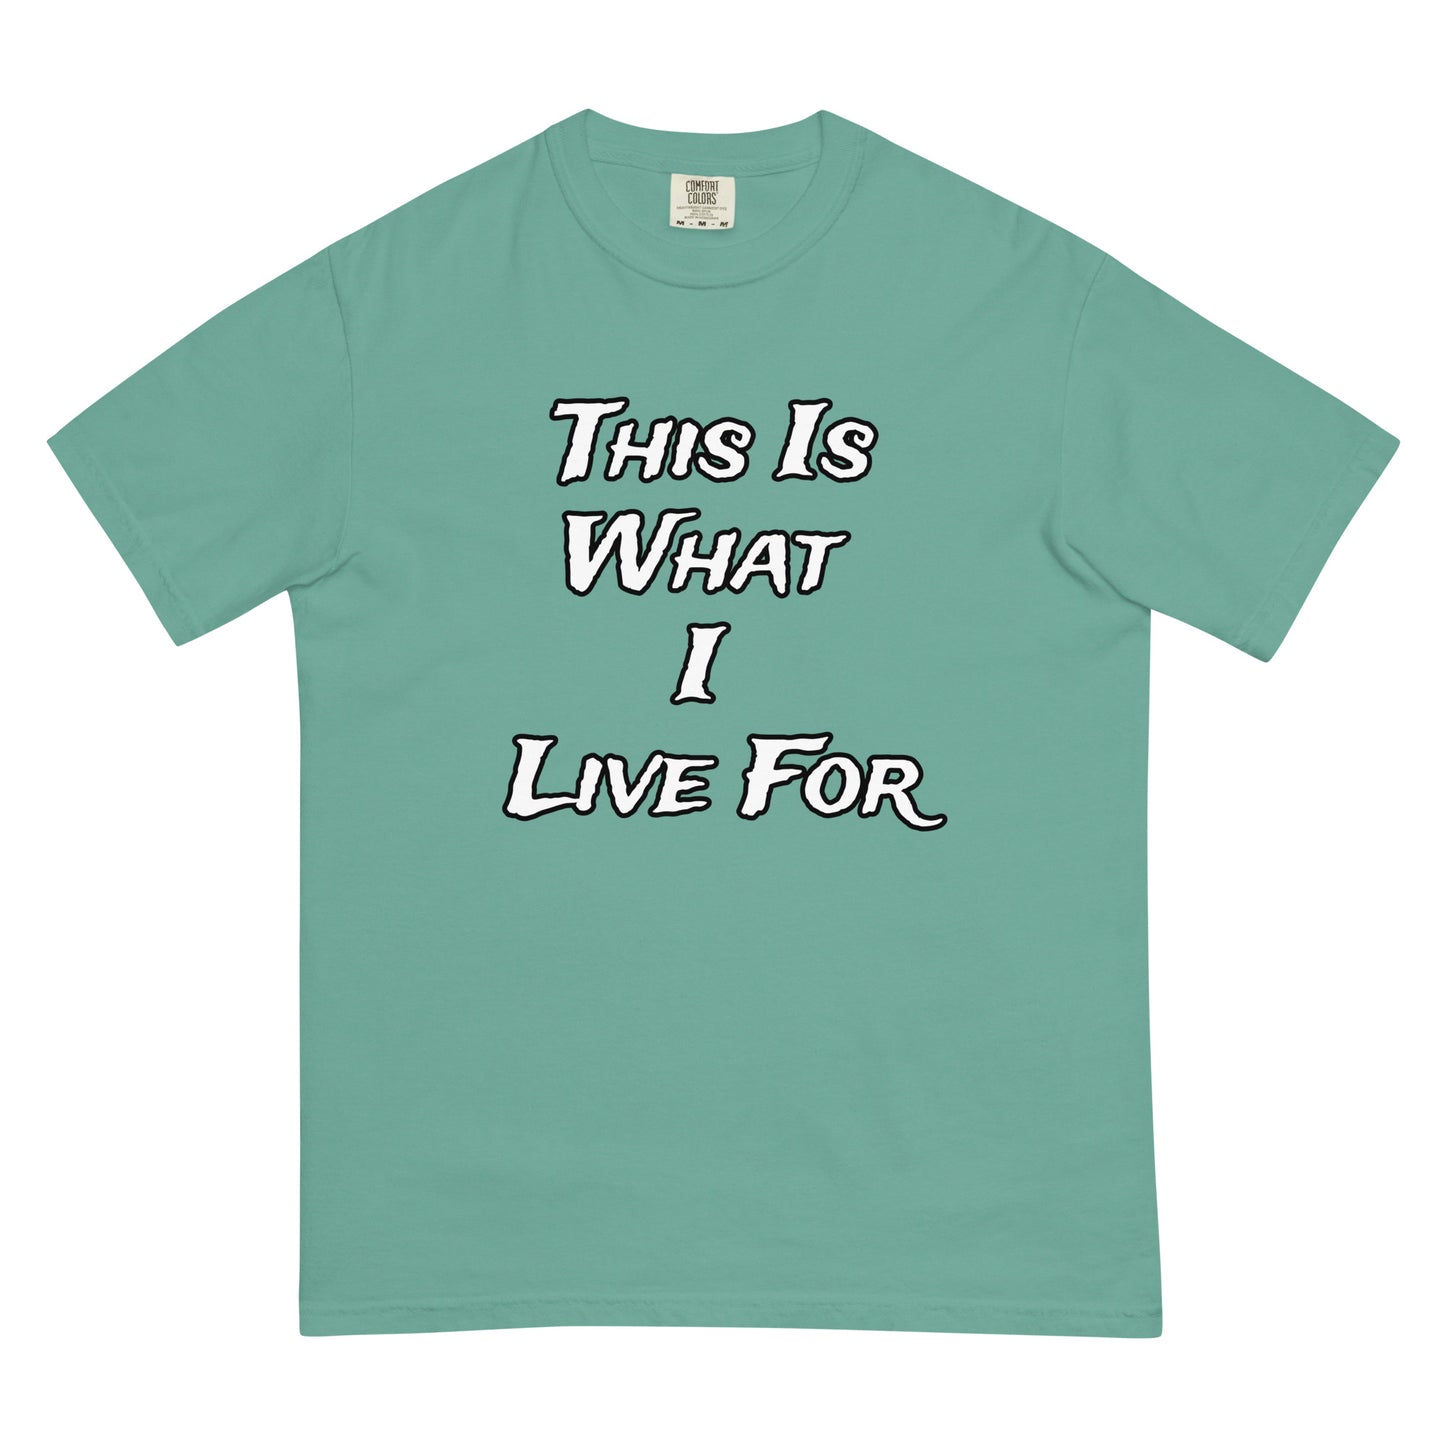 This is What I Live For heavyweight t-shirt